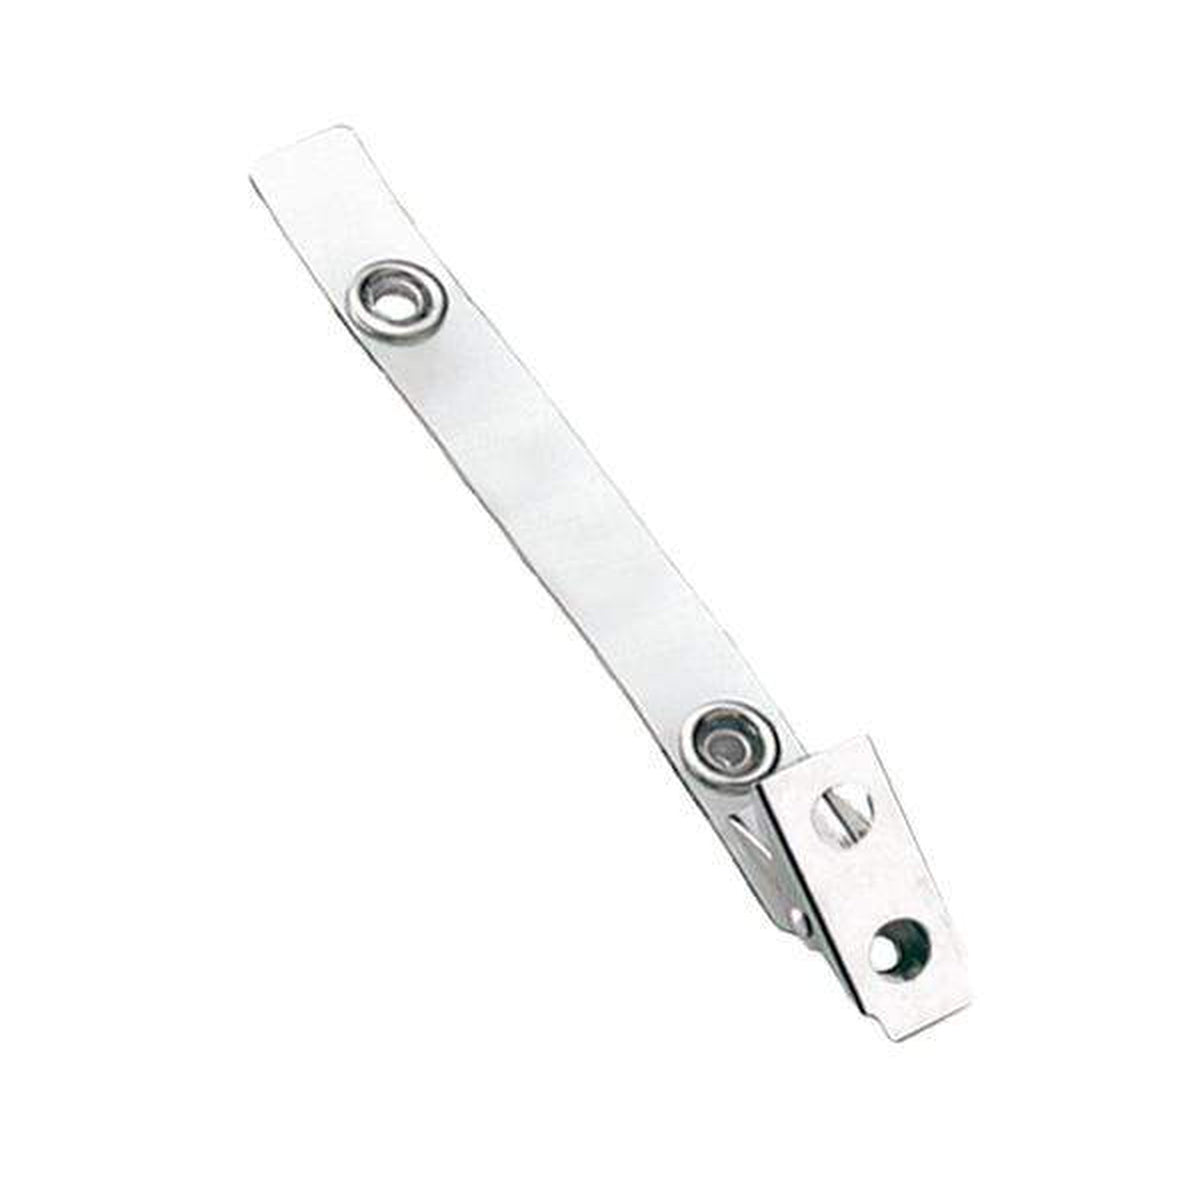 Clear Vinyl Strap Clip W/ 2-Hole Stainless Steel Clip 2105-1320 2105-1320